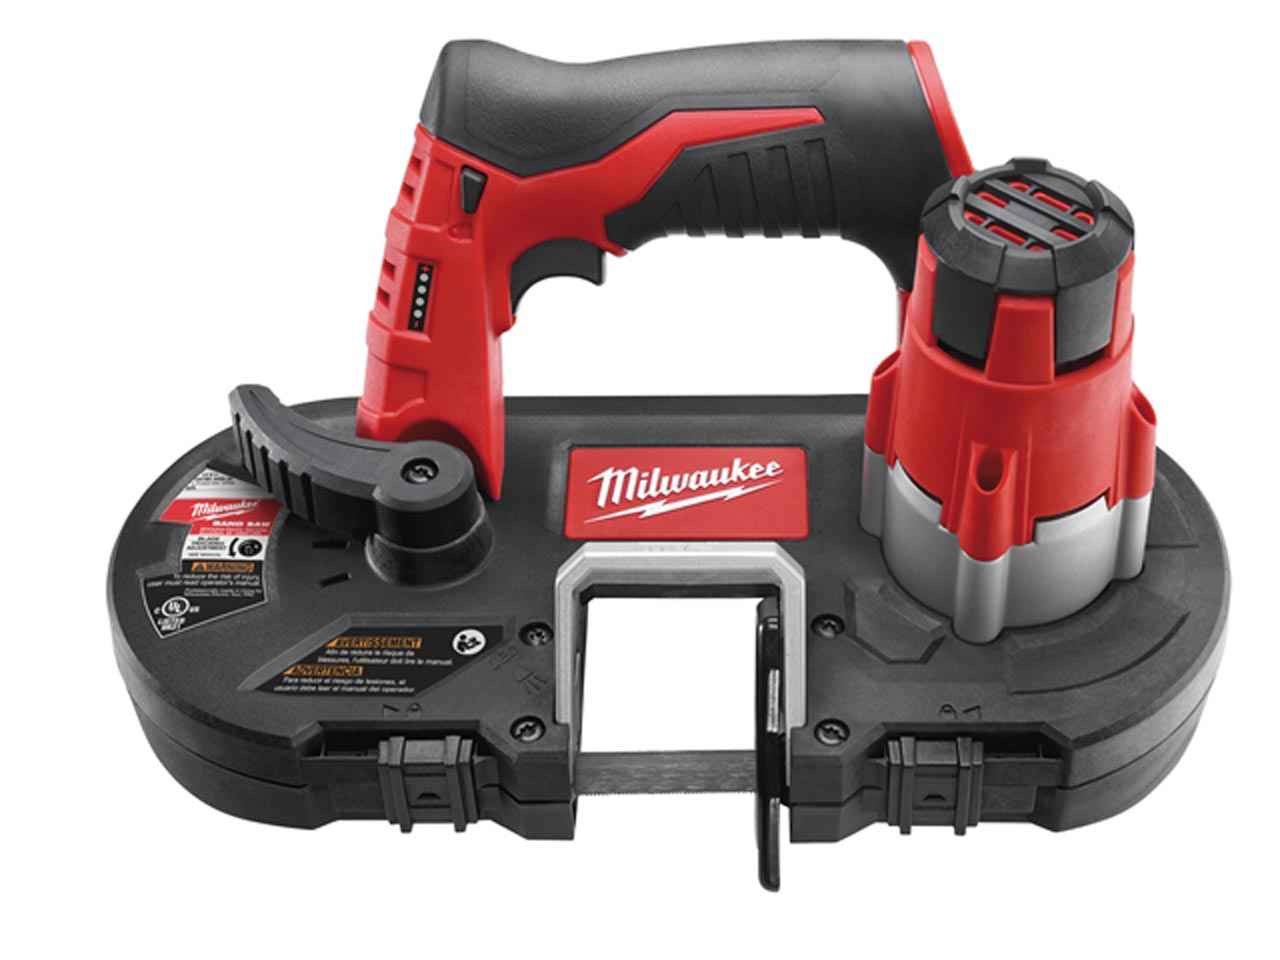 Milwaukee M12BS 12V Sub Compact Bandsaw - Body Only